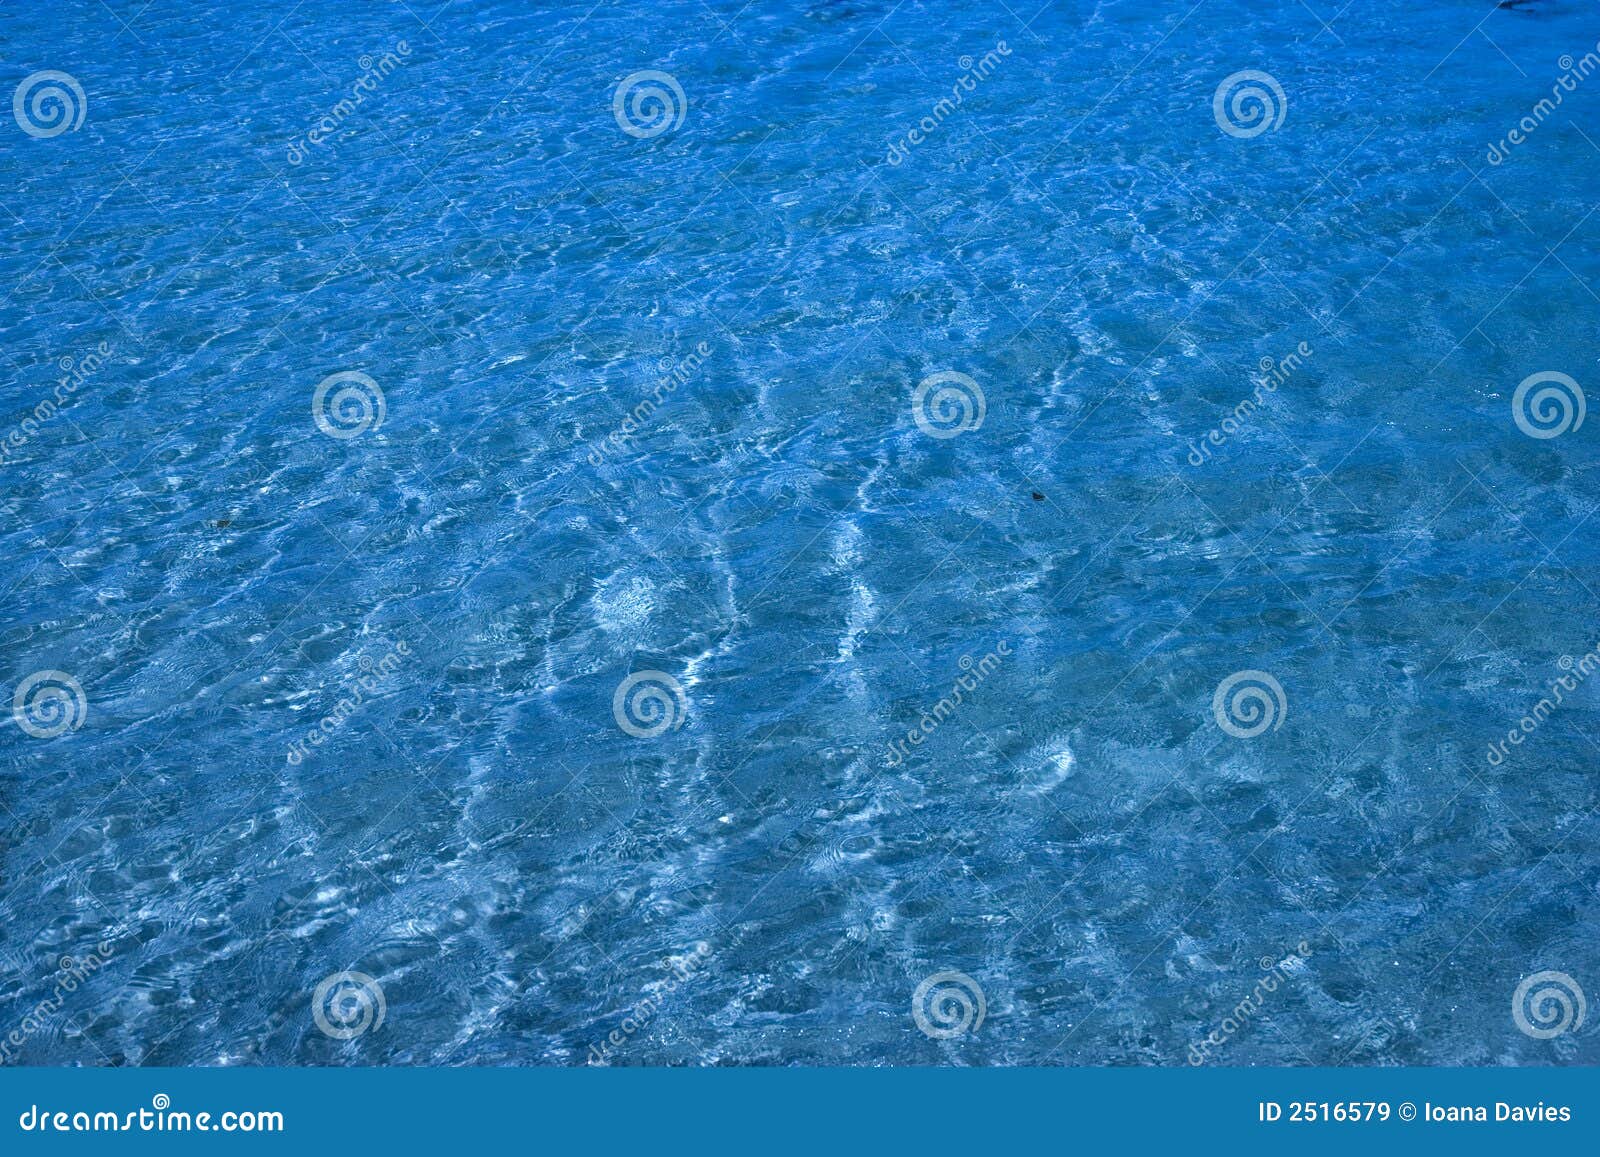 pristine ocean water over sand